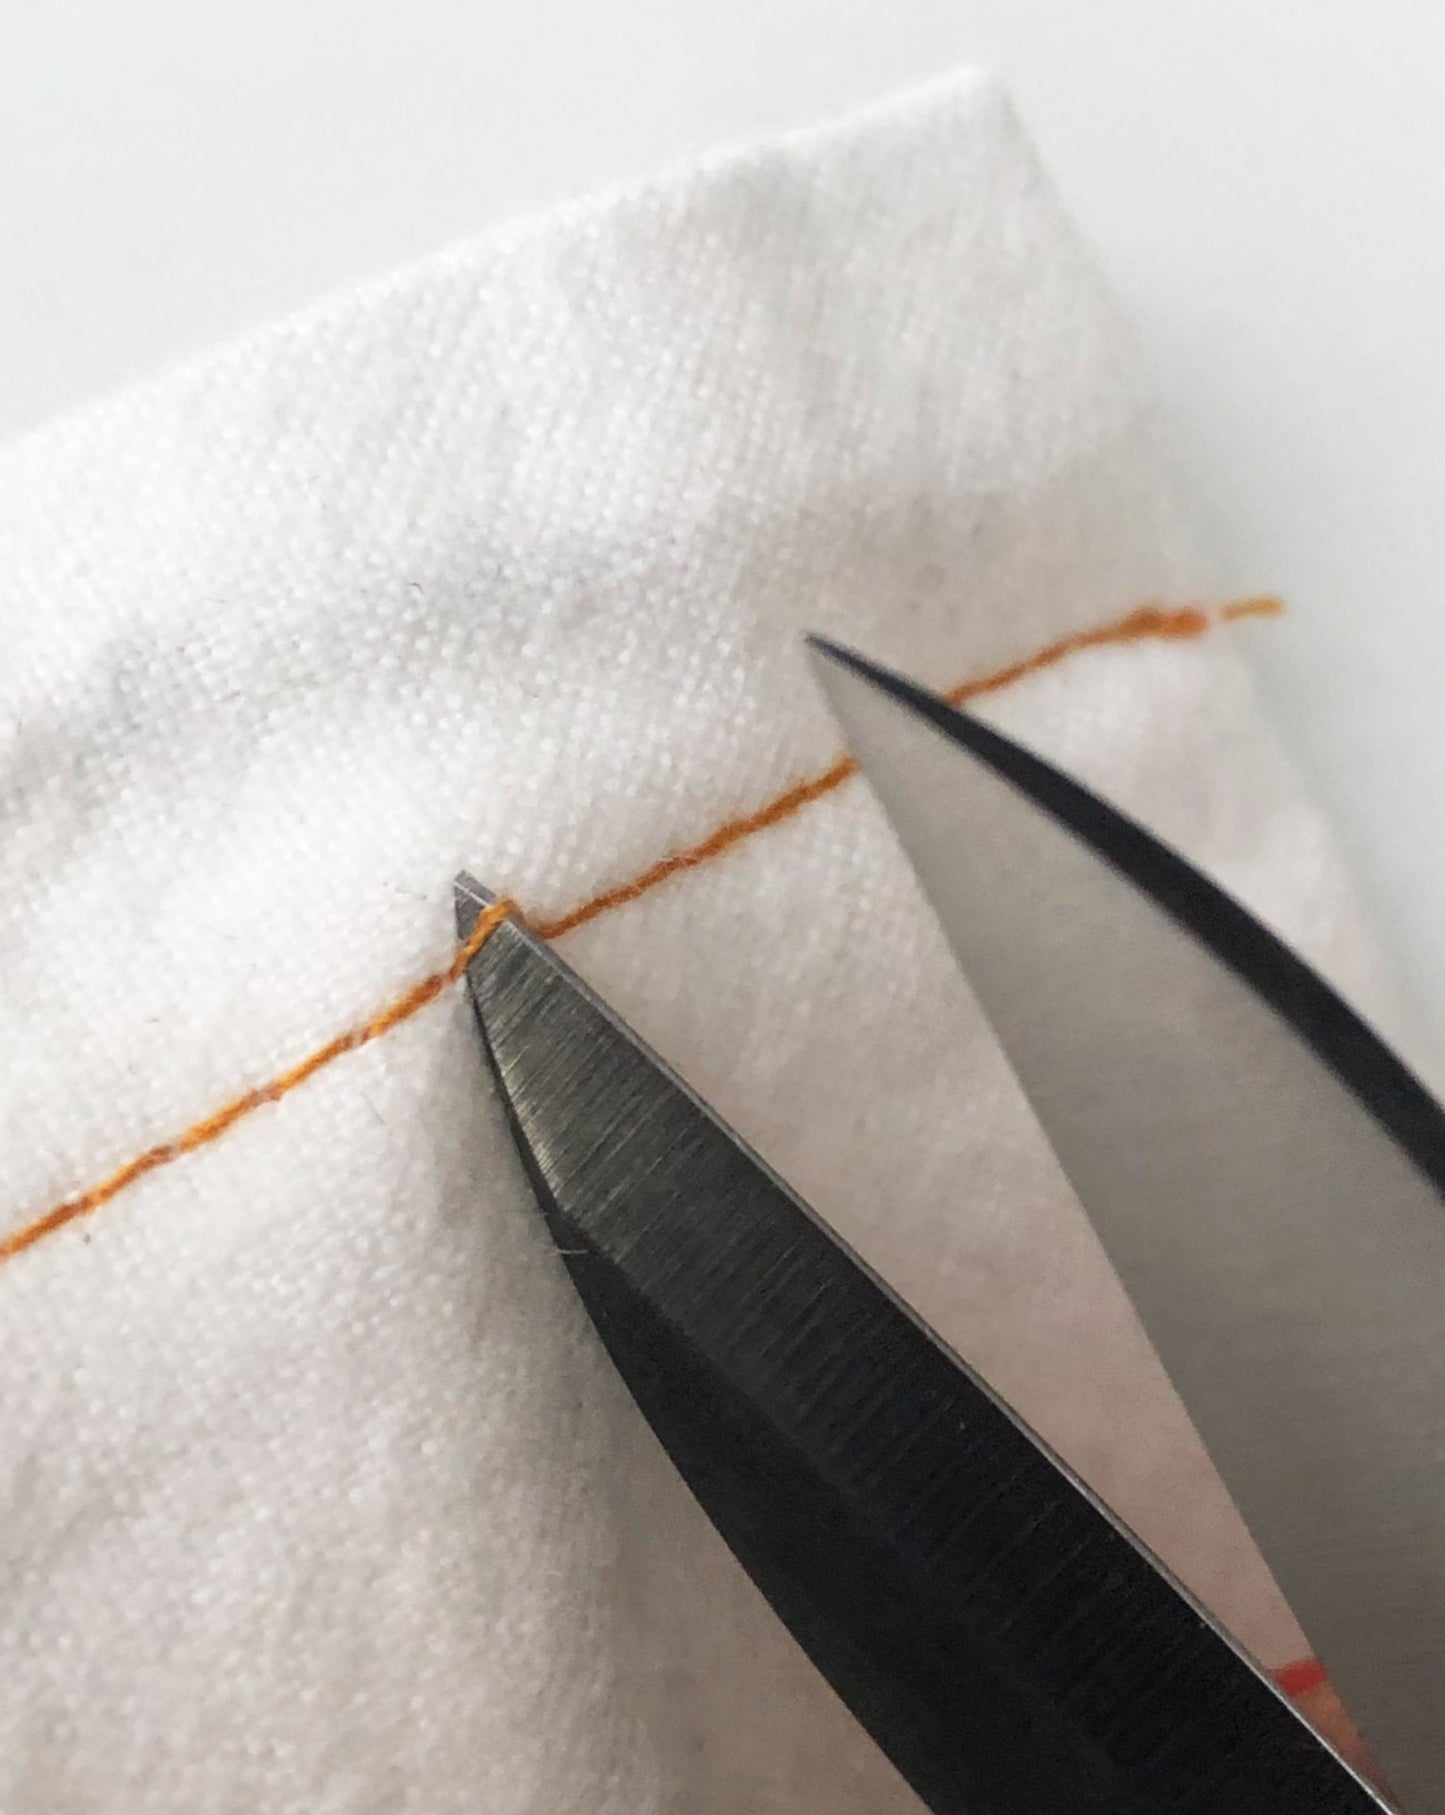 Cutting with a Japanese Thread Scissors